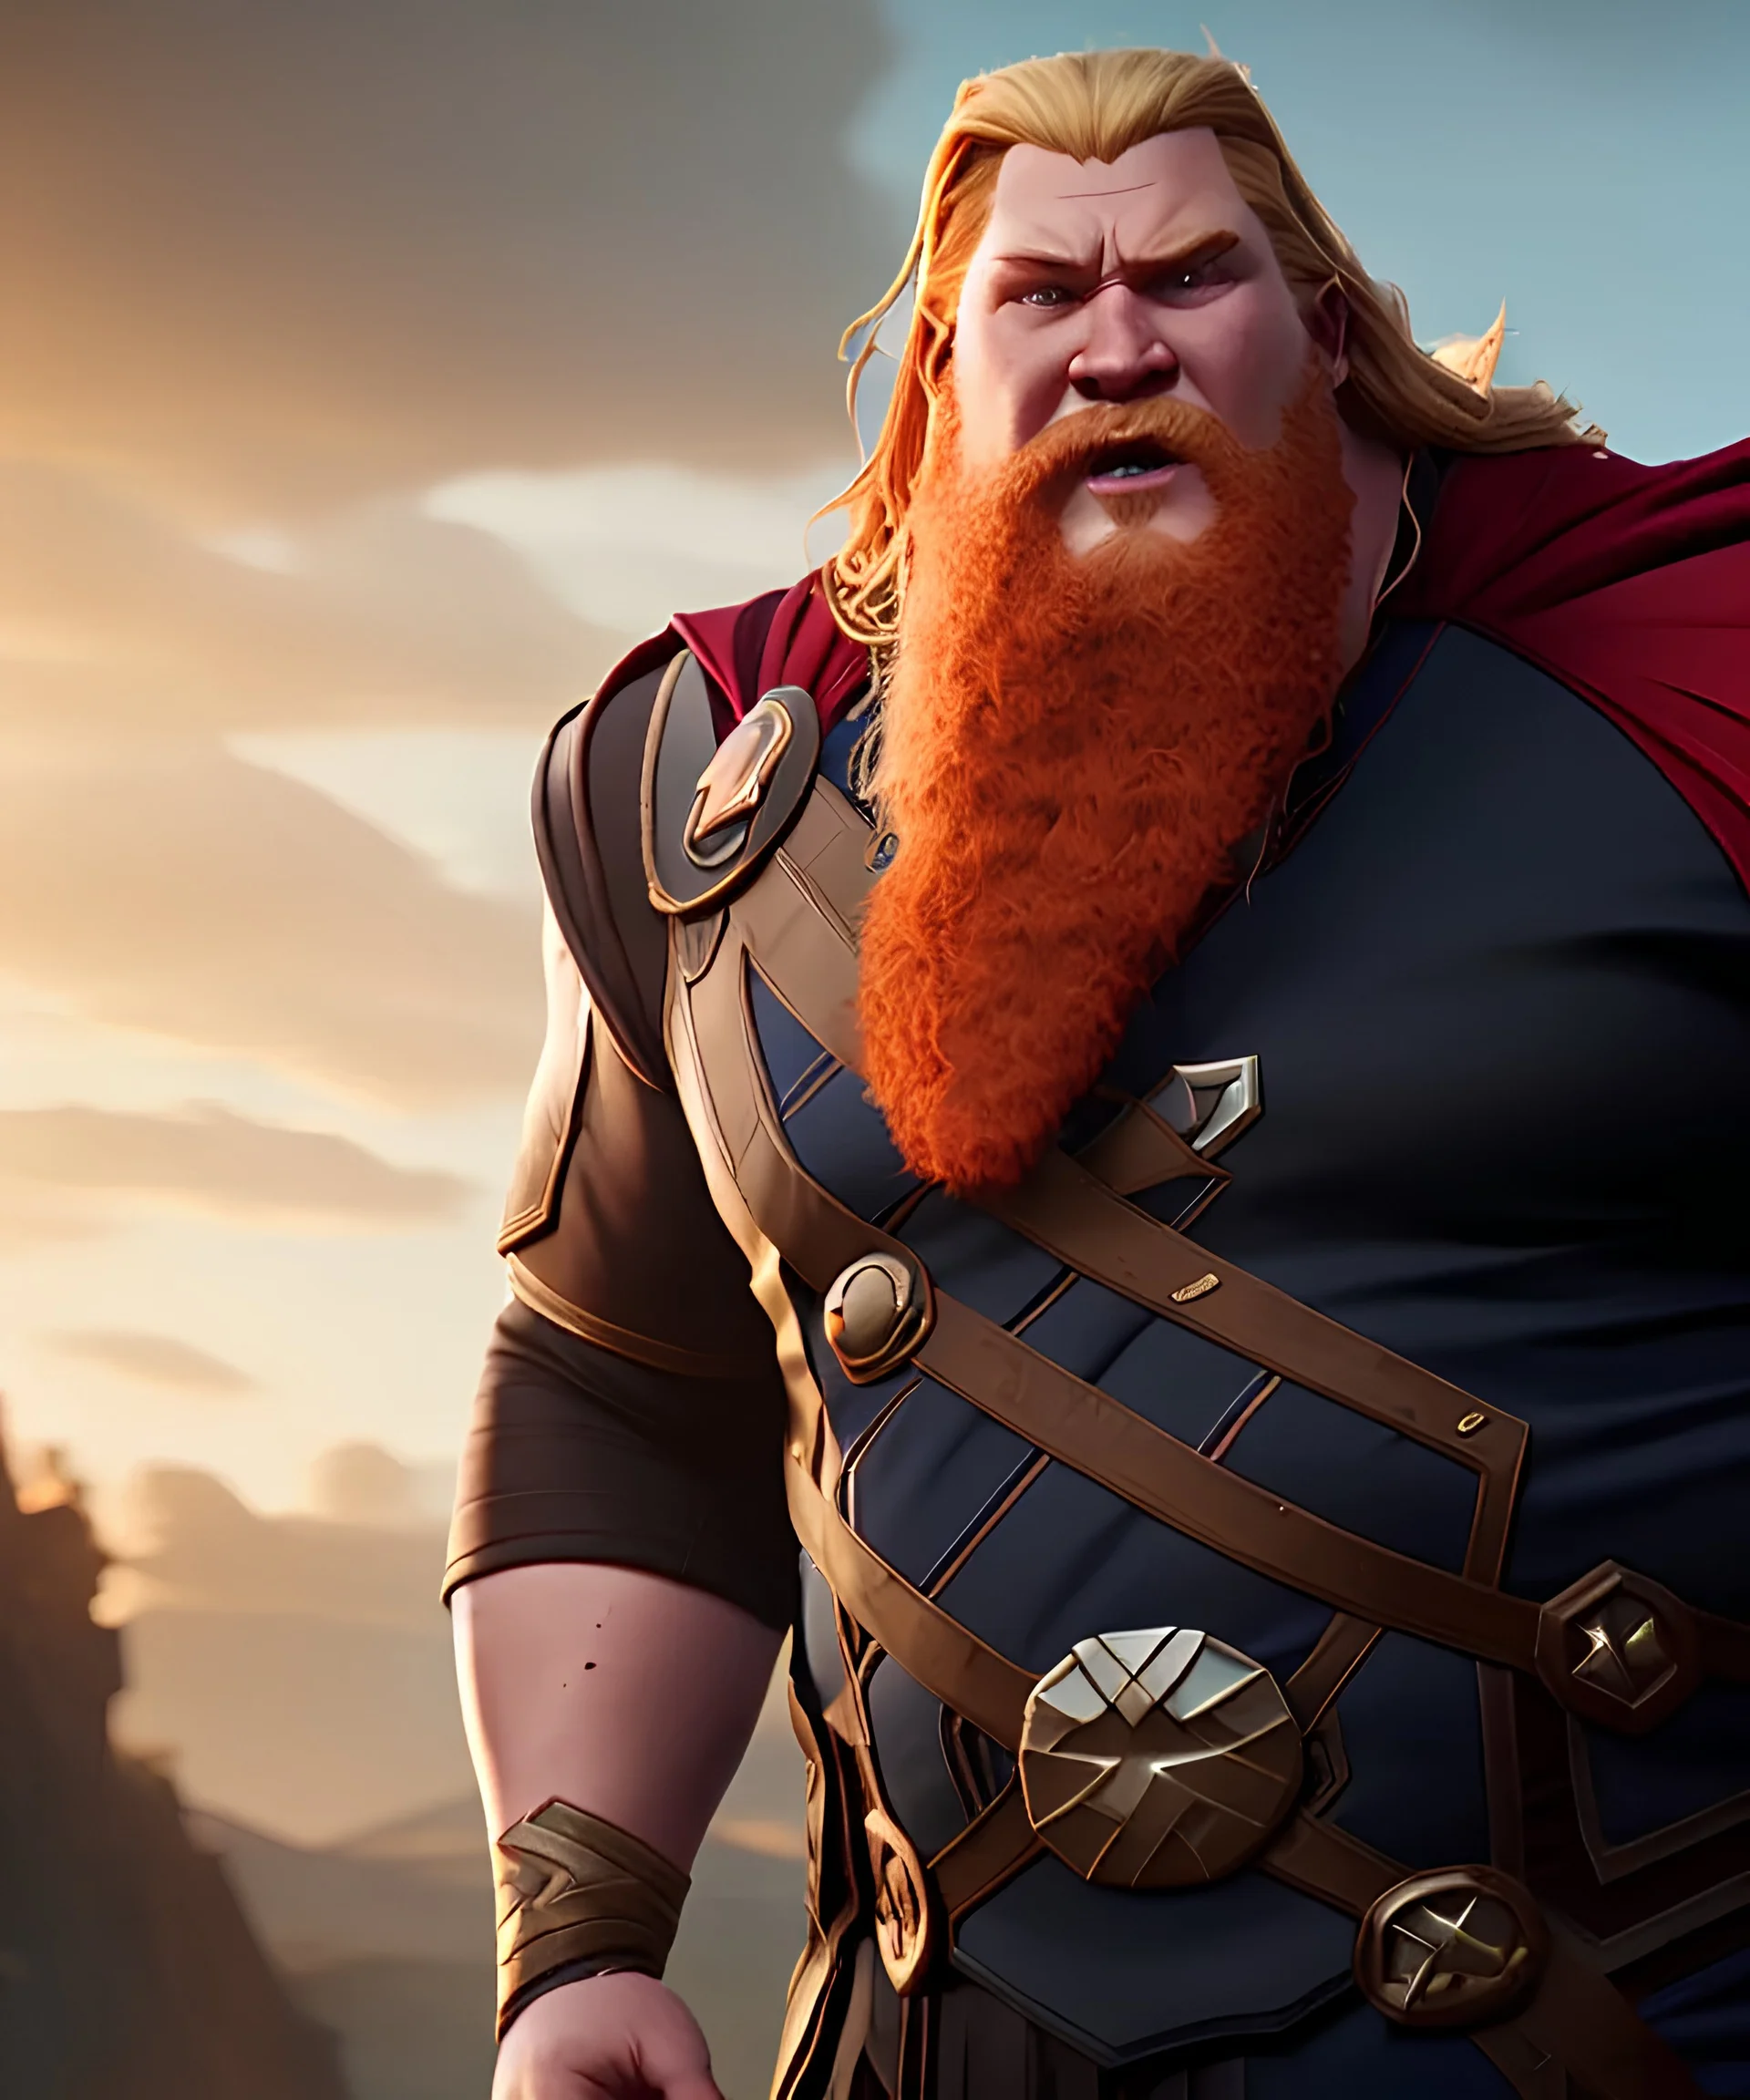 Fat thor with ginger hair, magnificent, majestic, Realistic photography, incredibly detailed, ultra high resolution, 8k, complex 3d render, cinema 4d.